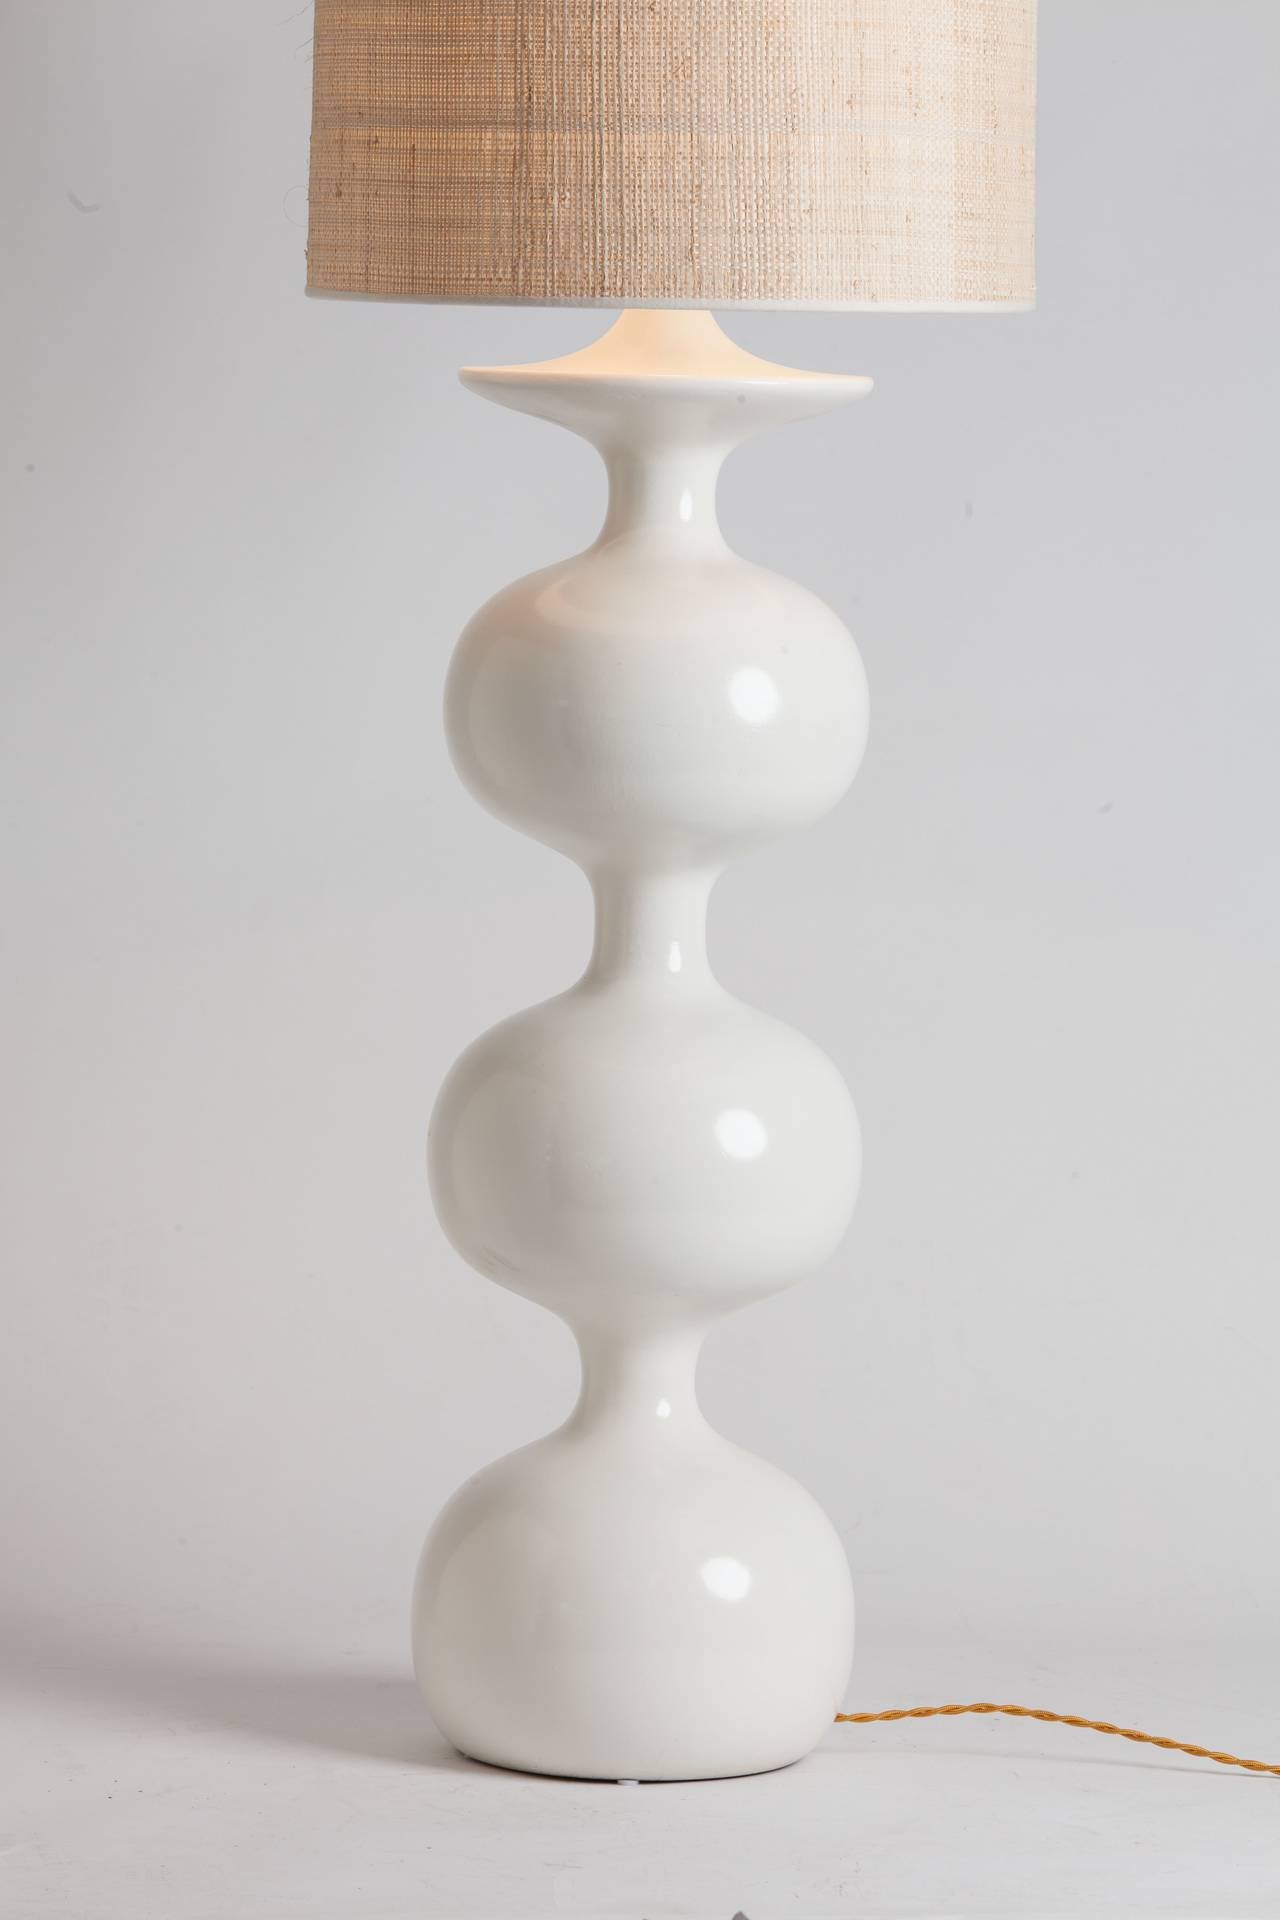 Elegant French lacquered wood table lamp in white. Custom Japanese straw shade made in Paris.